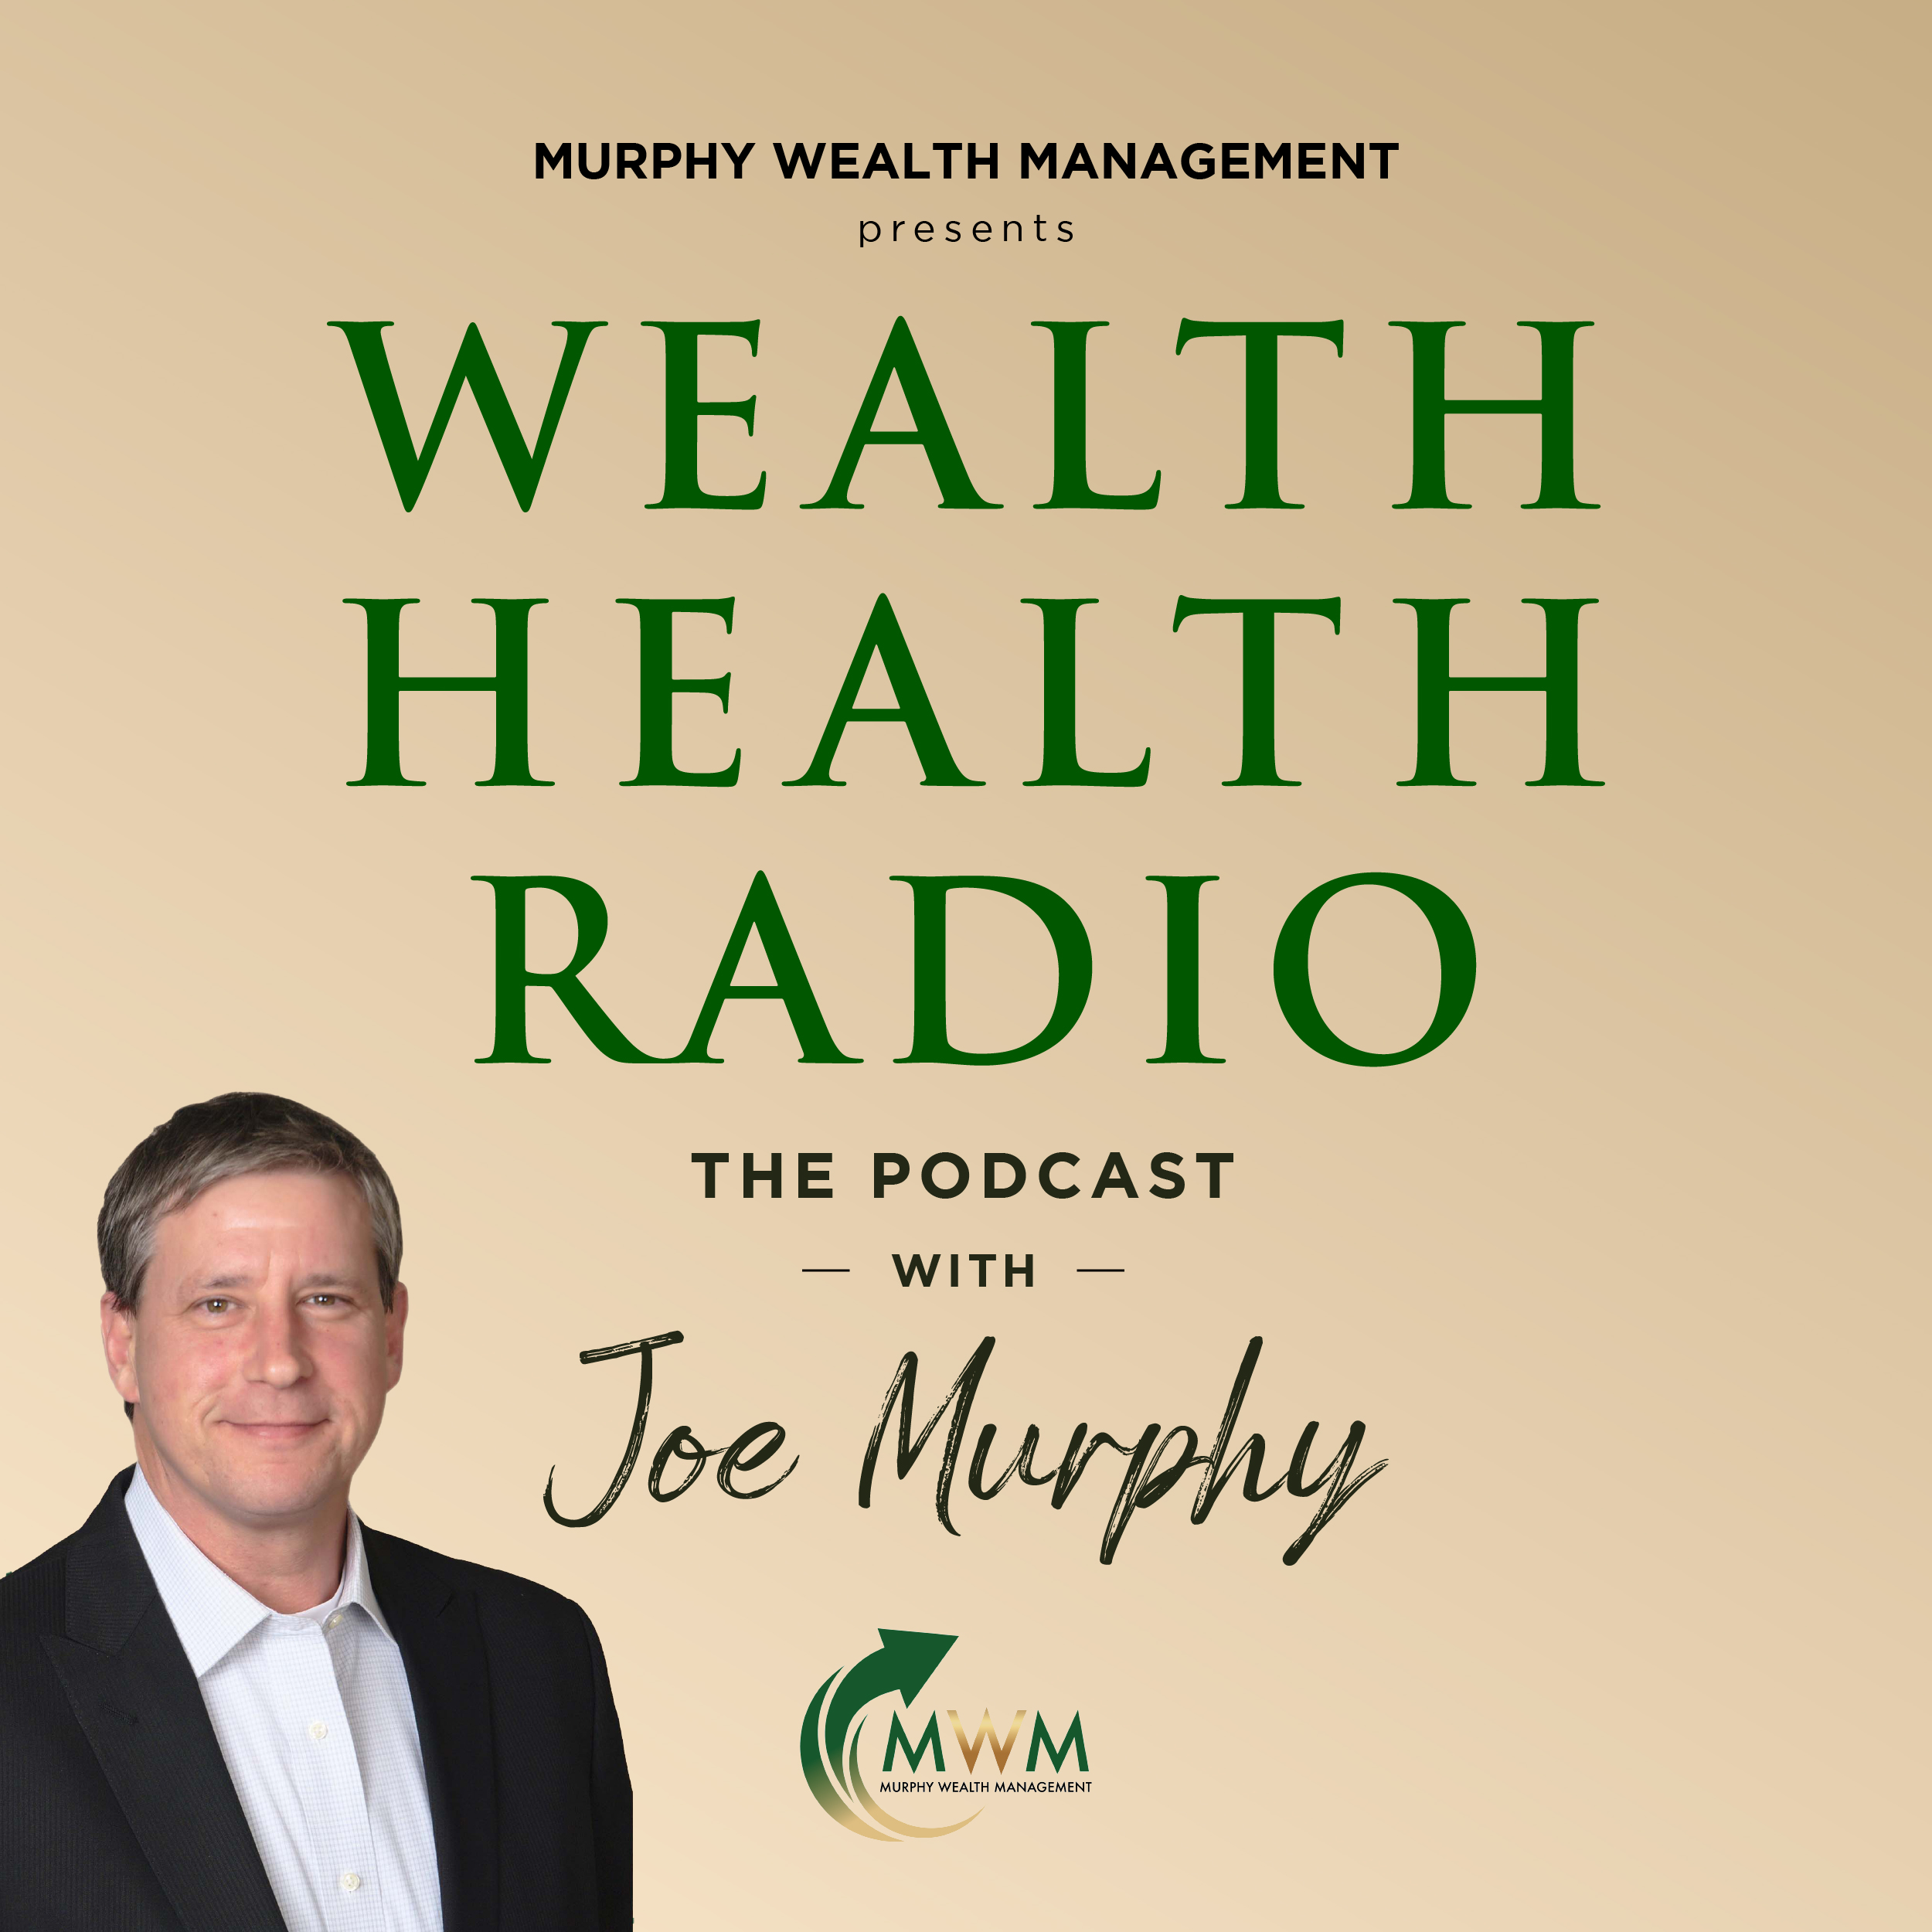 Ep 34 Wealth Health Radio Joe Murphy digs into how to properly put a retirement and income plan together.